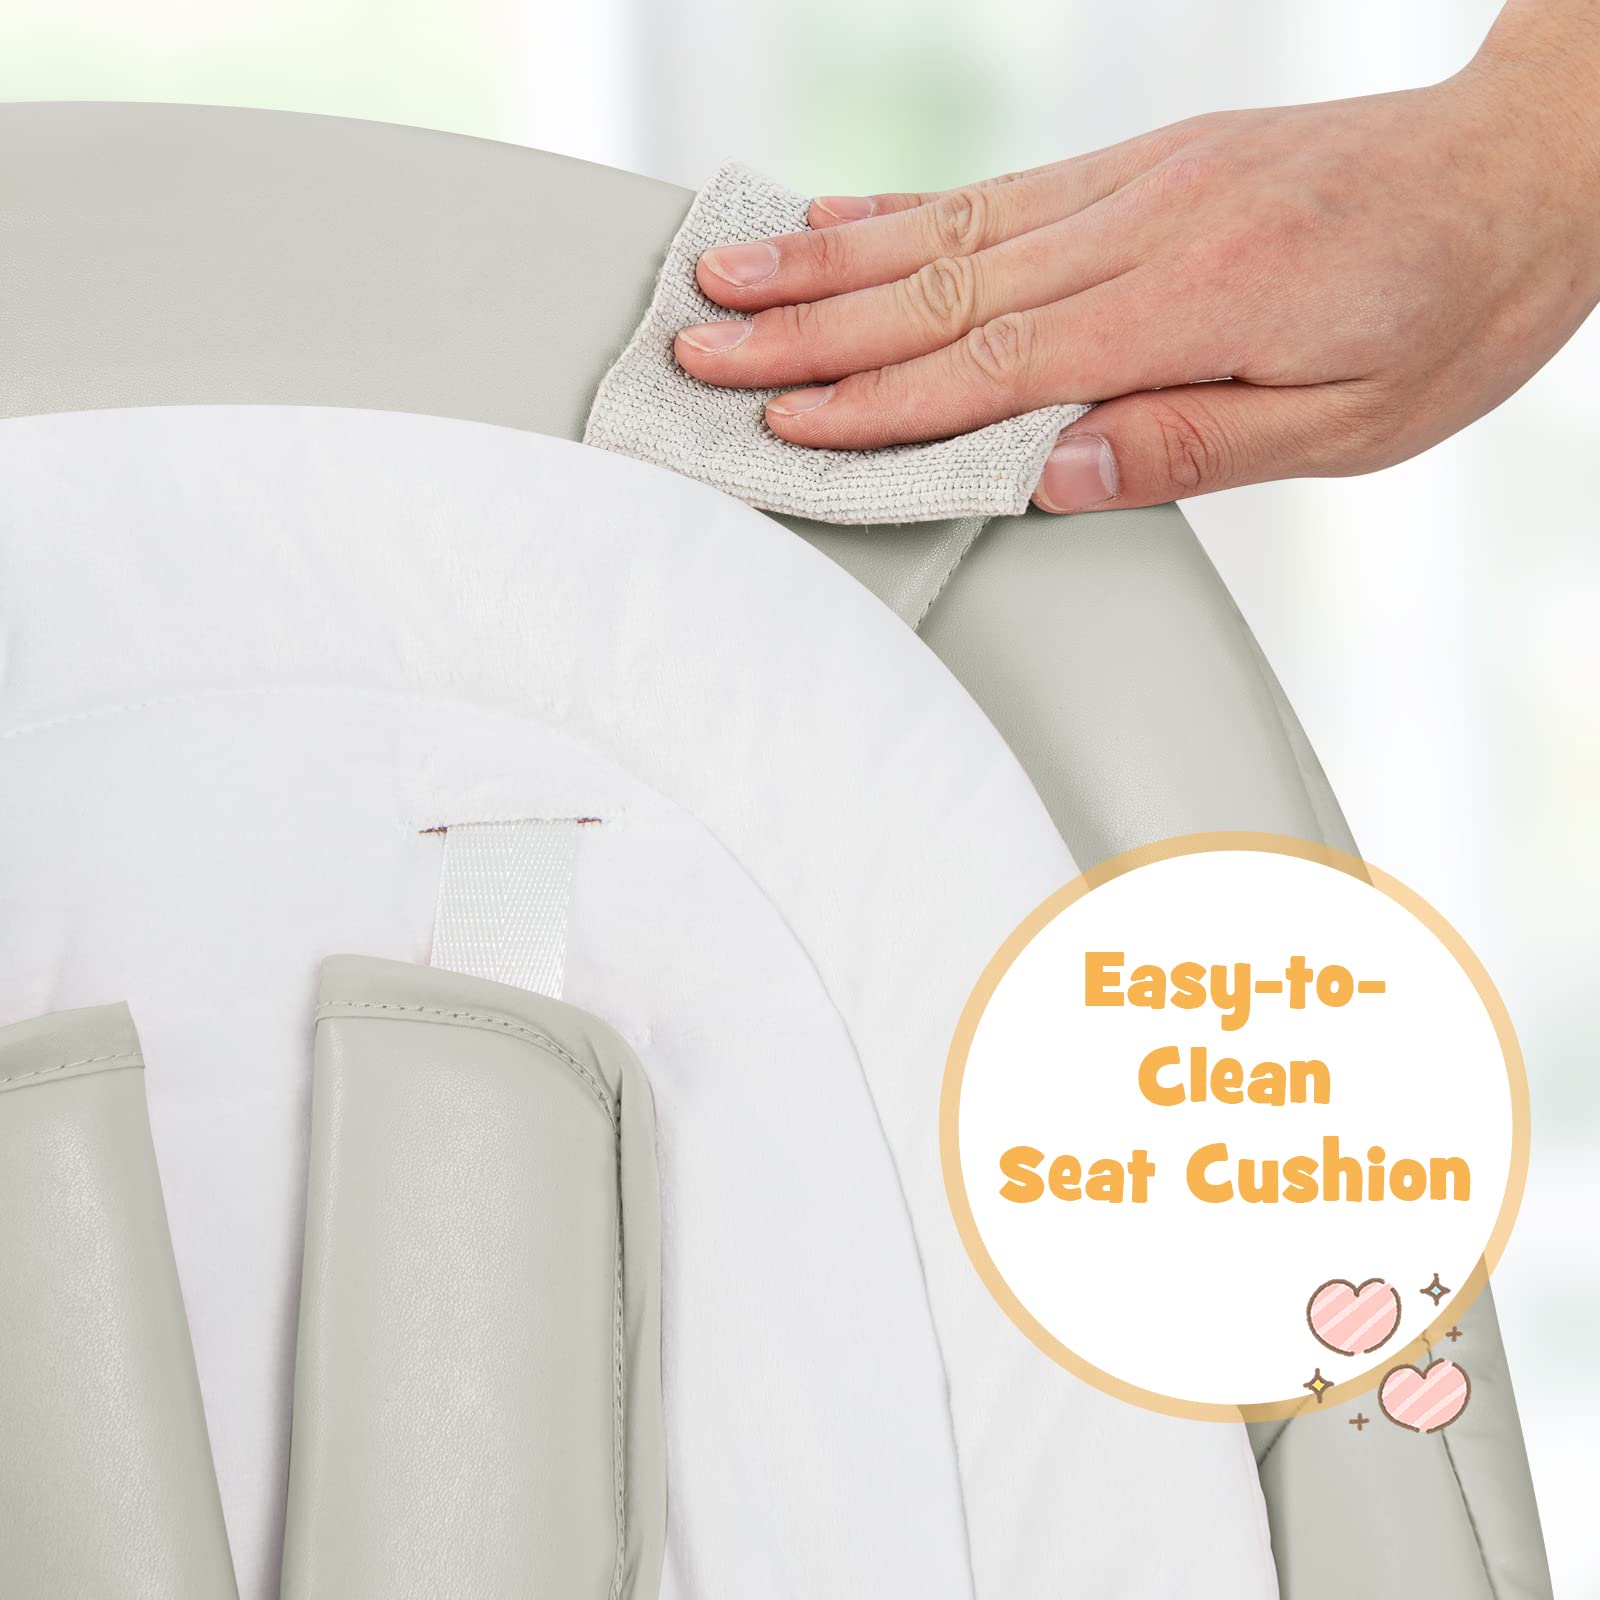 3-In-1 Adjustable Baby High Chair with Soft Seat Cushion for